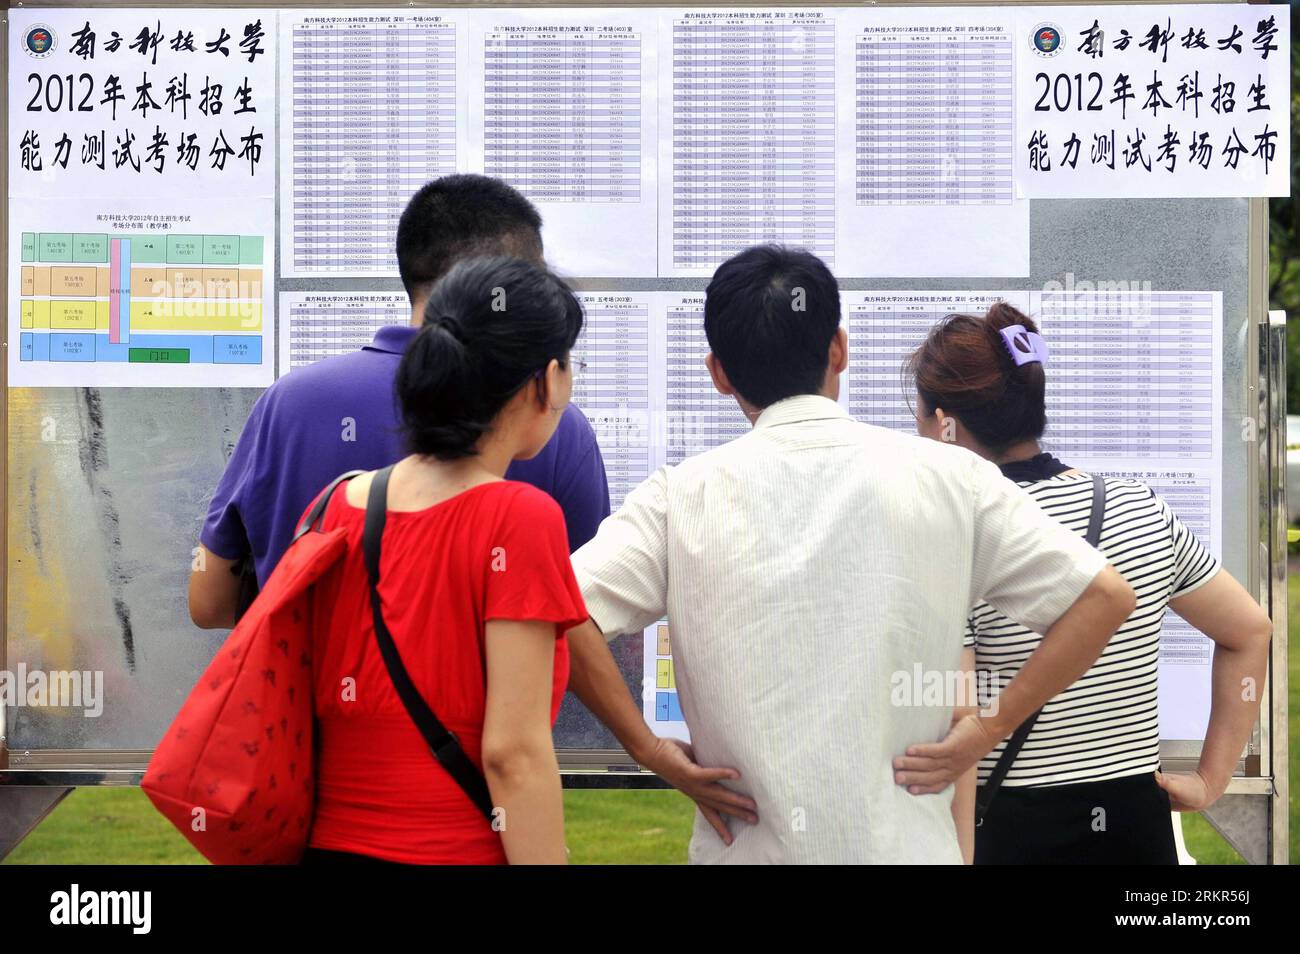 Bildnummer: 58121735  Datum: 19.06.2012  Copyright: imago/Xinhua (120619) -- SHENZHEN, June 19, 2012 (Xinhua) -- Parents of examinees look at a list outside the examination site at the South University of Science and Technology of China (SUSTC) in Shenzhen, south China s Guangdong Province, June 19, 2012. About 1,400 students took part in an independent recruitment held by the SUSTC in eight provinces of China on Tuesday. The university will choose 180 freshmen according to the independent recruitment test score, the National College Entrance Examination score and their regular grades in high Stock Photo